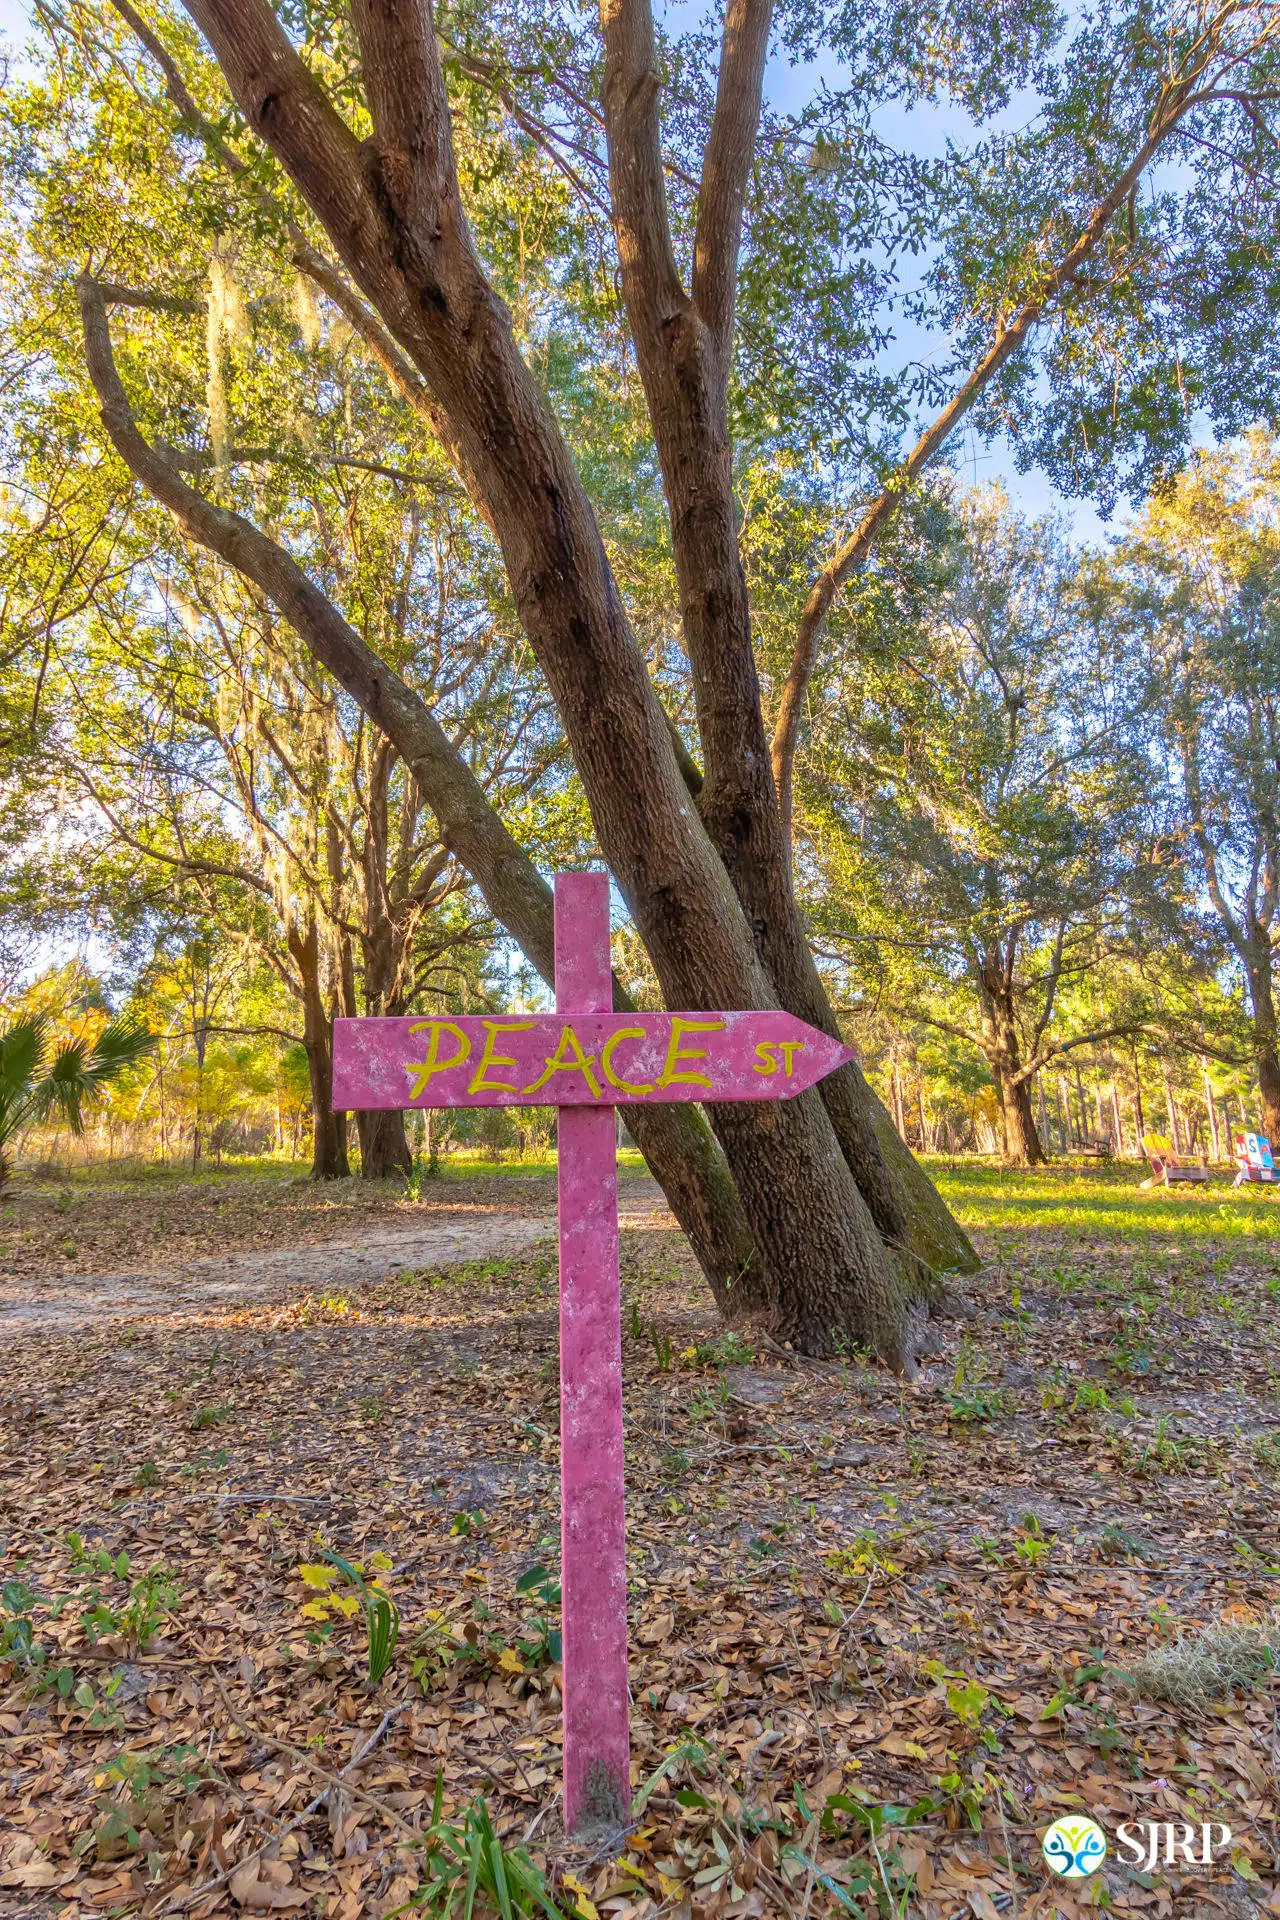 Wood area with a pink stake and sign reading "Peace St."